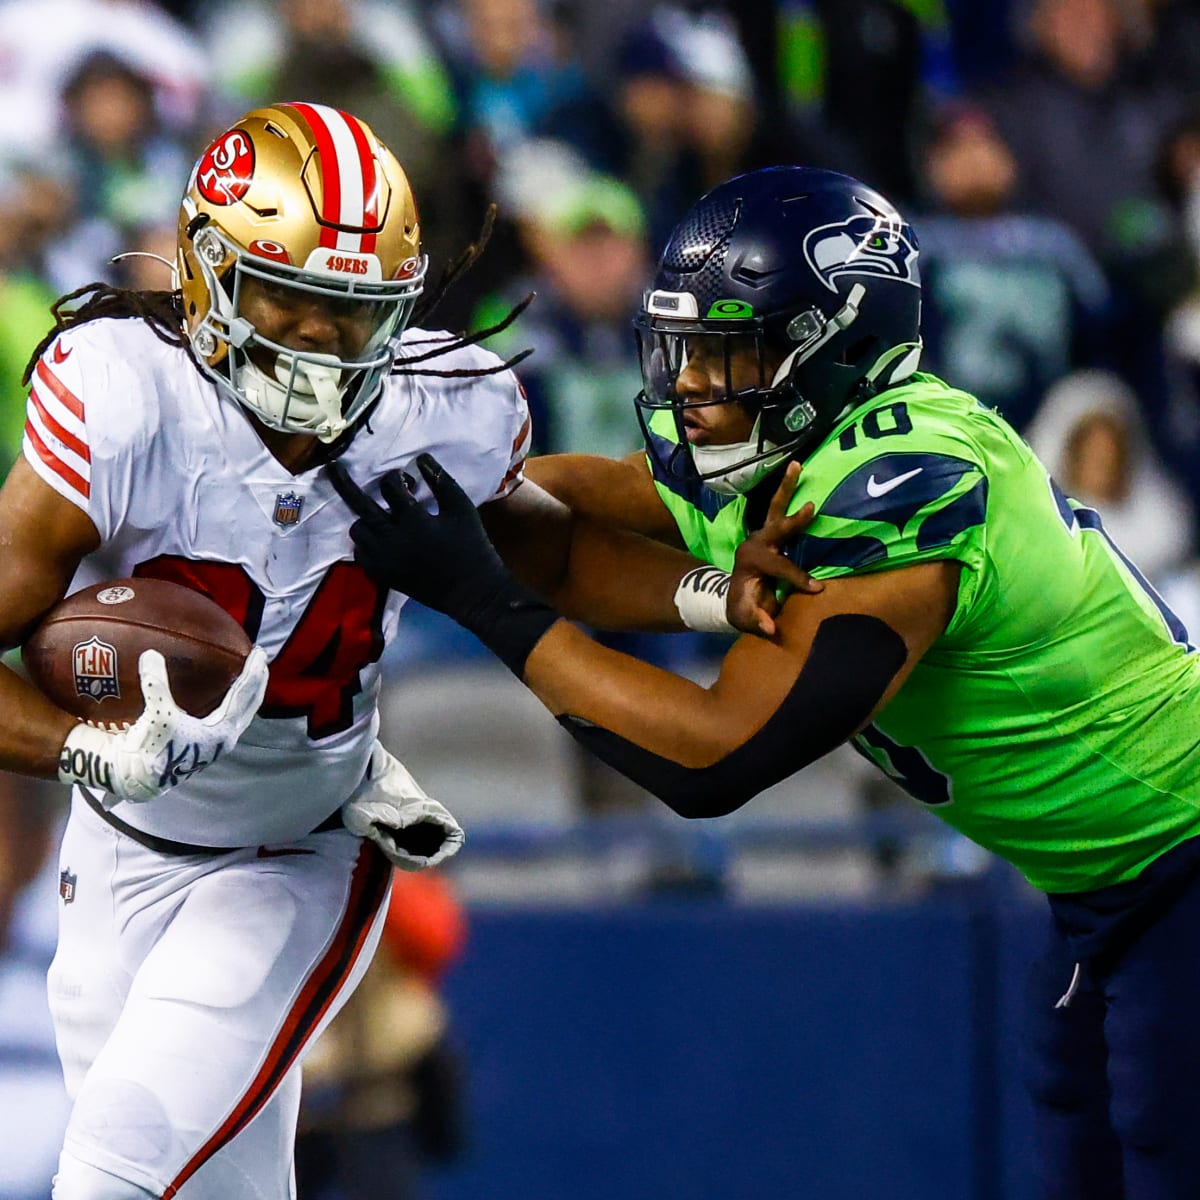 49ers vs. Seahawks live stream: TV channel, how to watch NFL